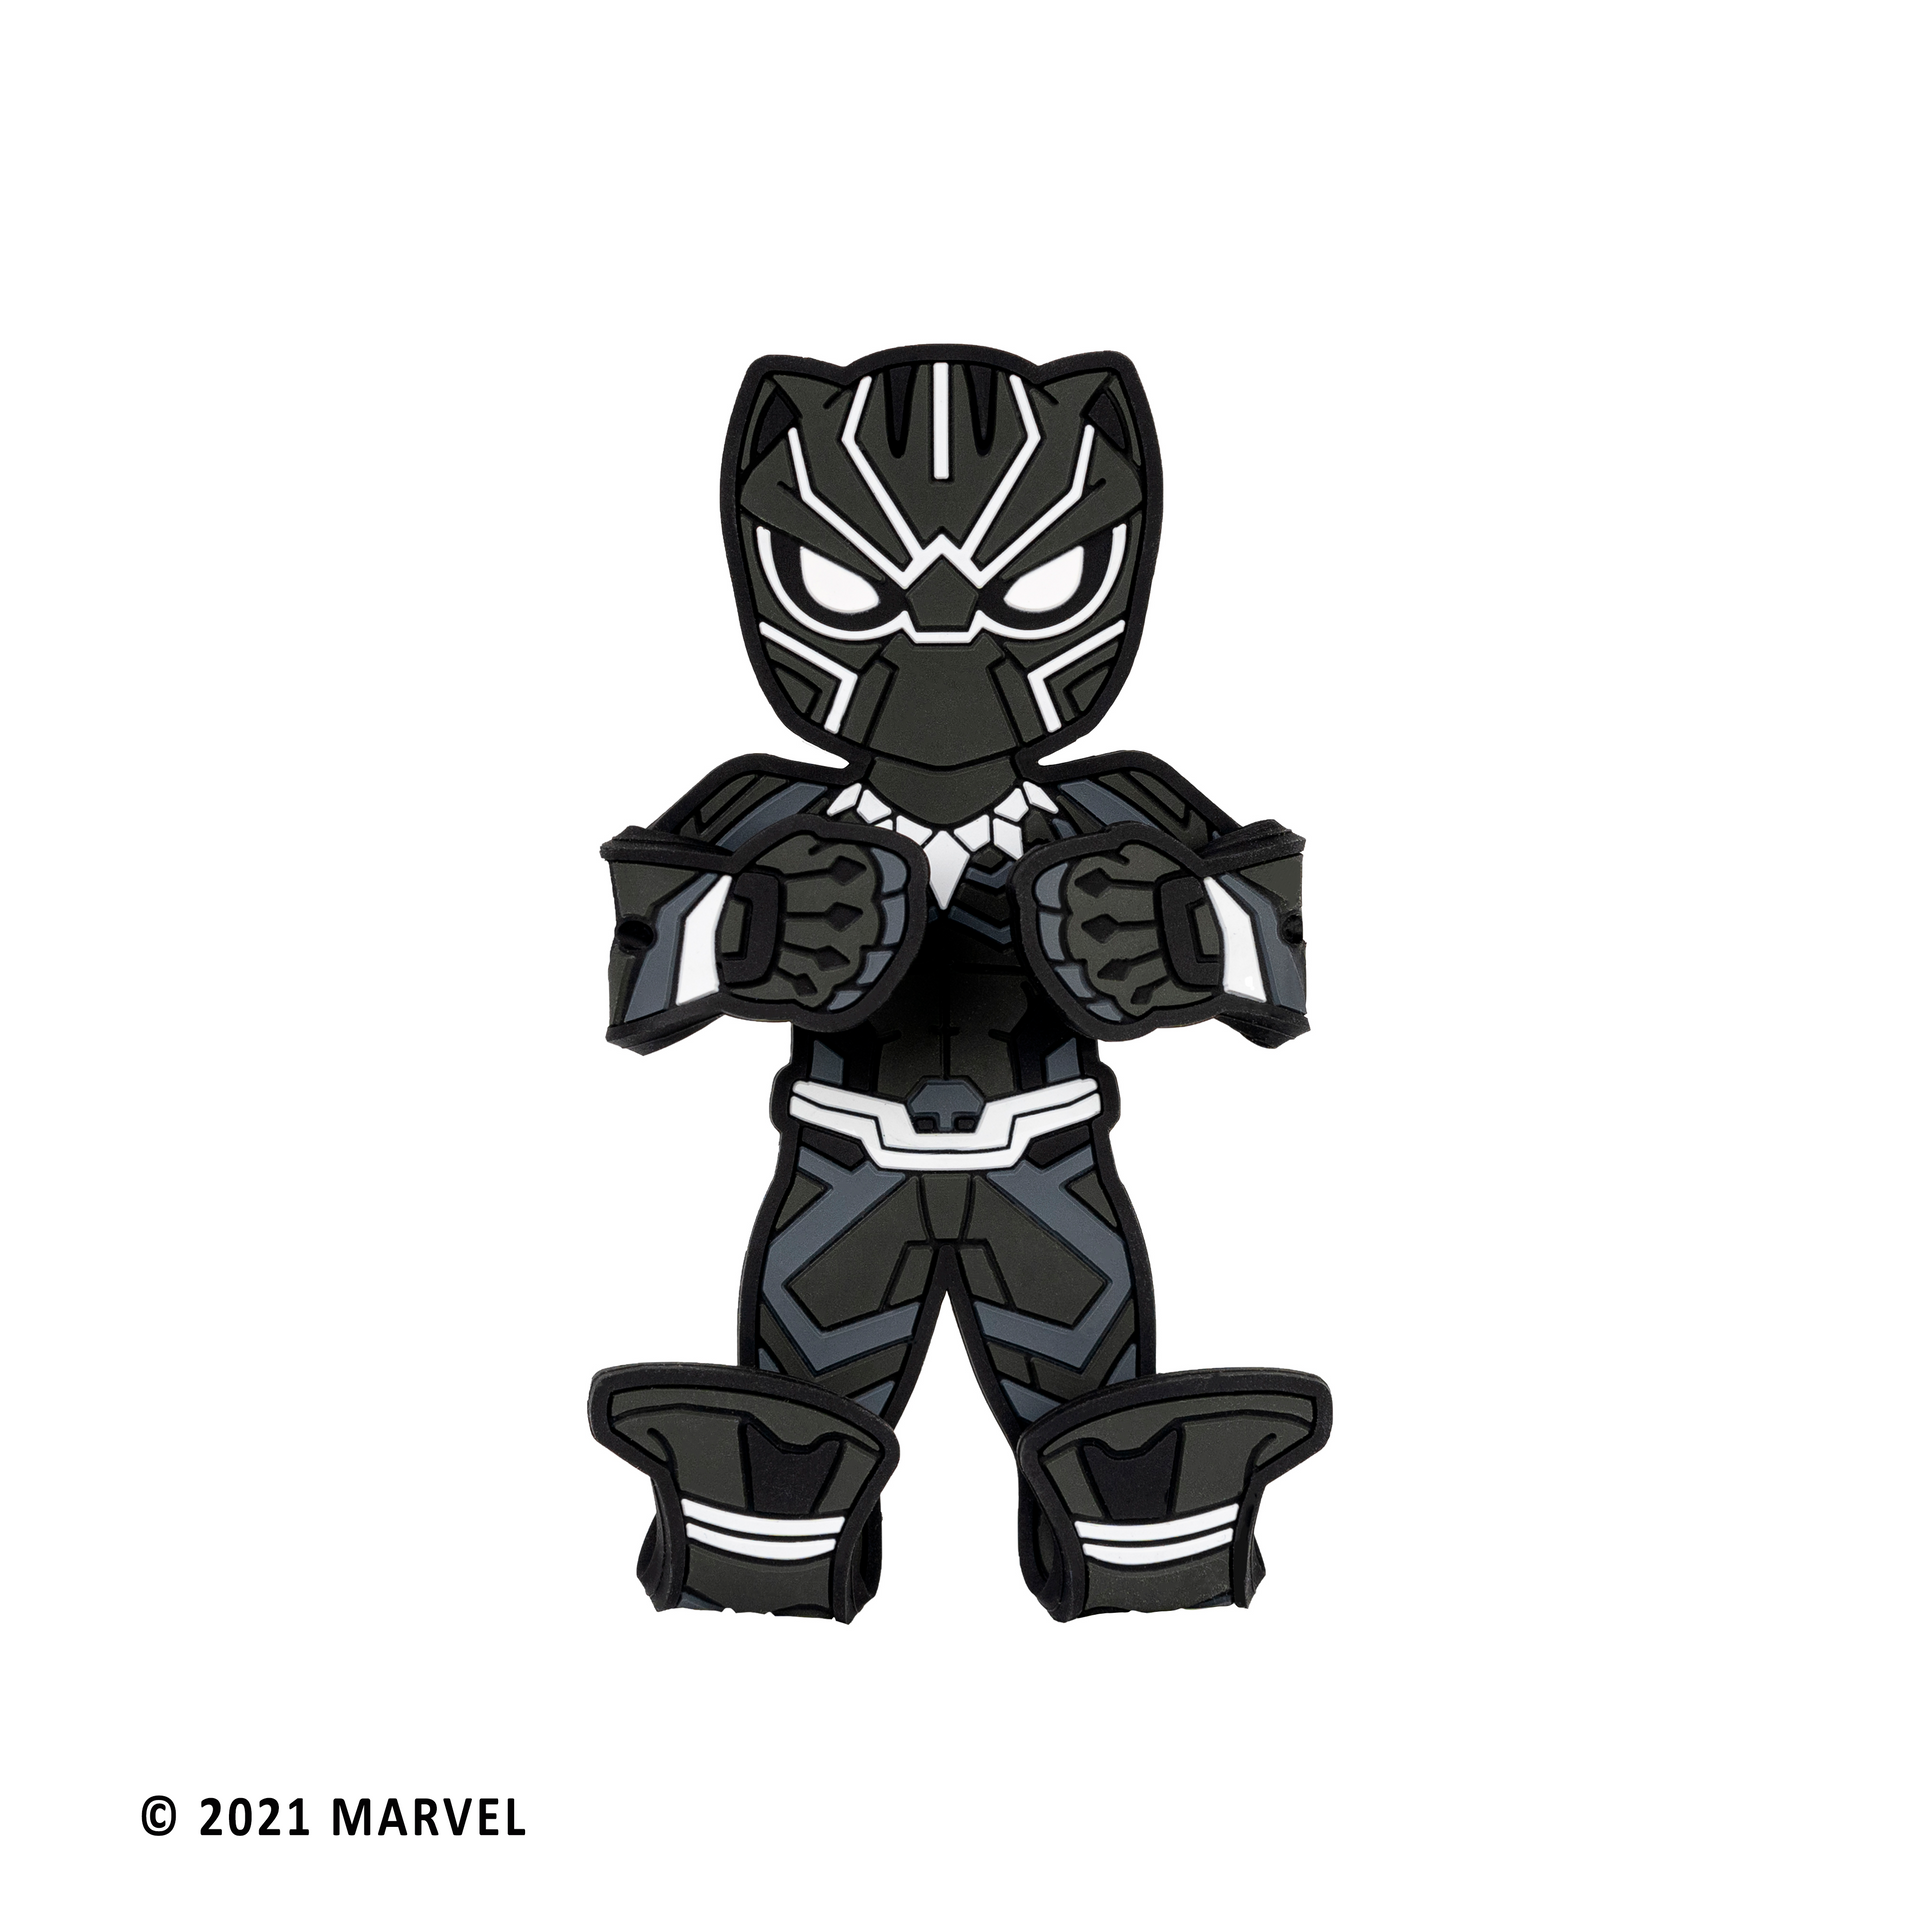 Image of Marvel Black Panther Hug Buddy on a white background with arms and legs folded